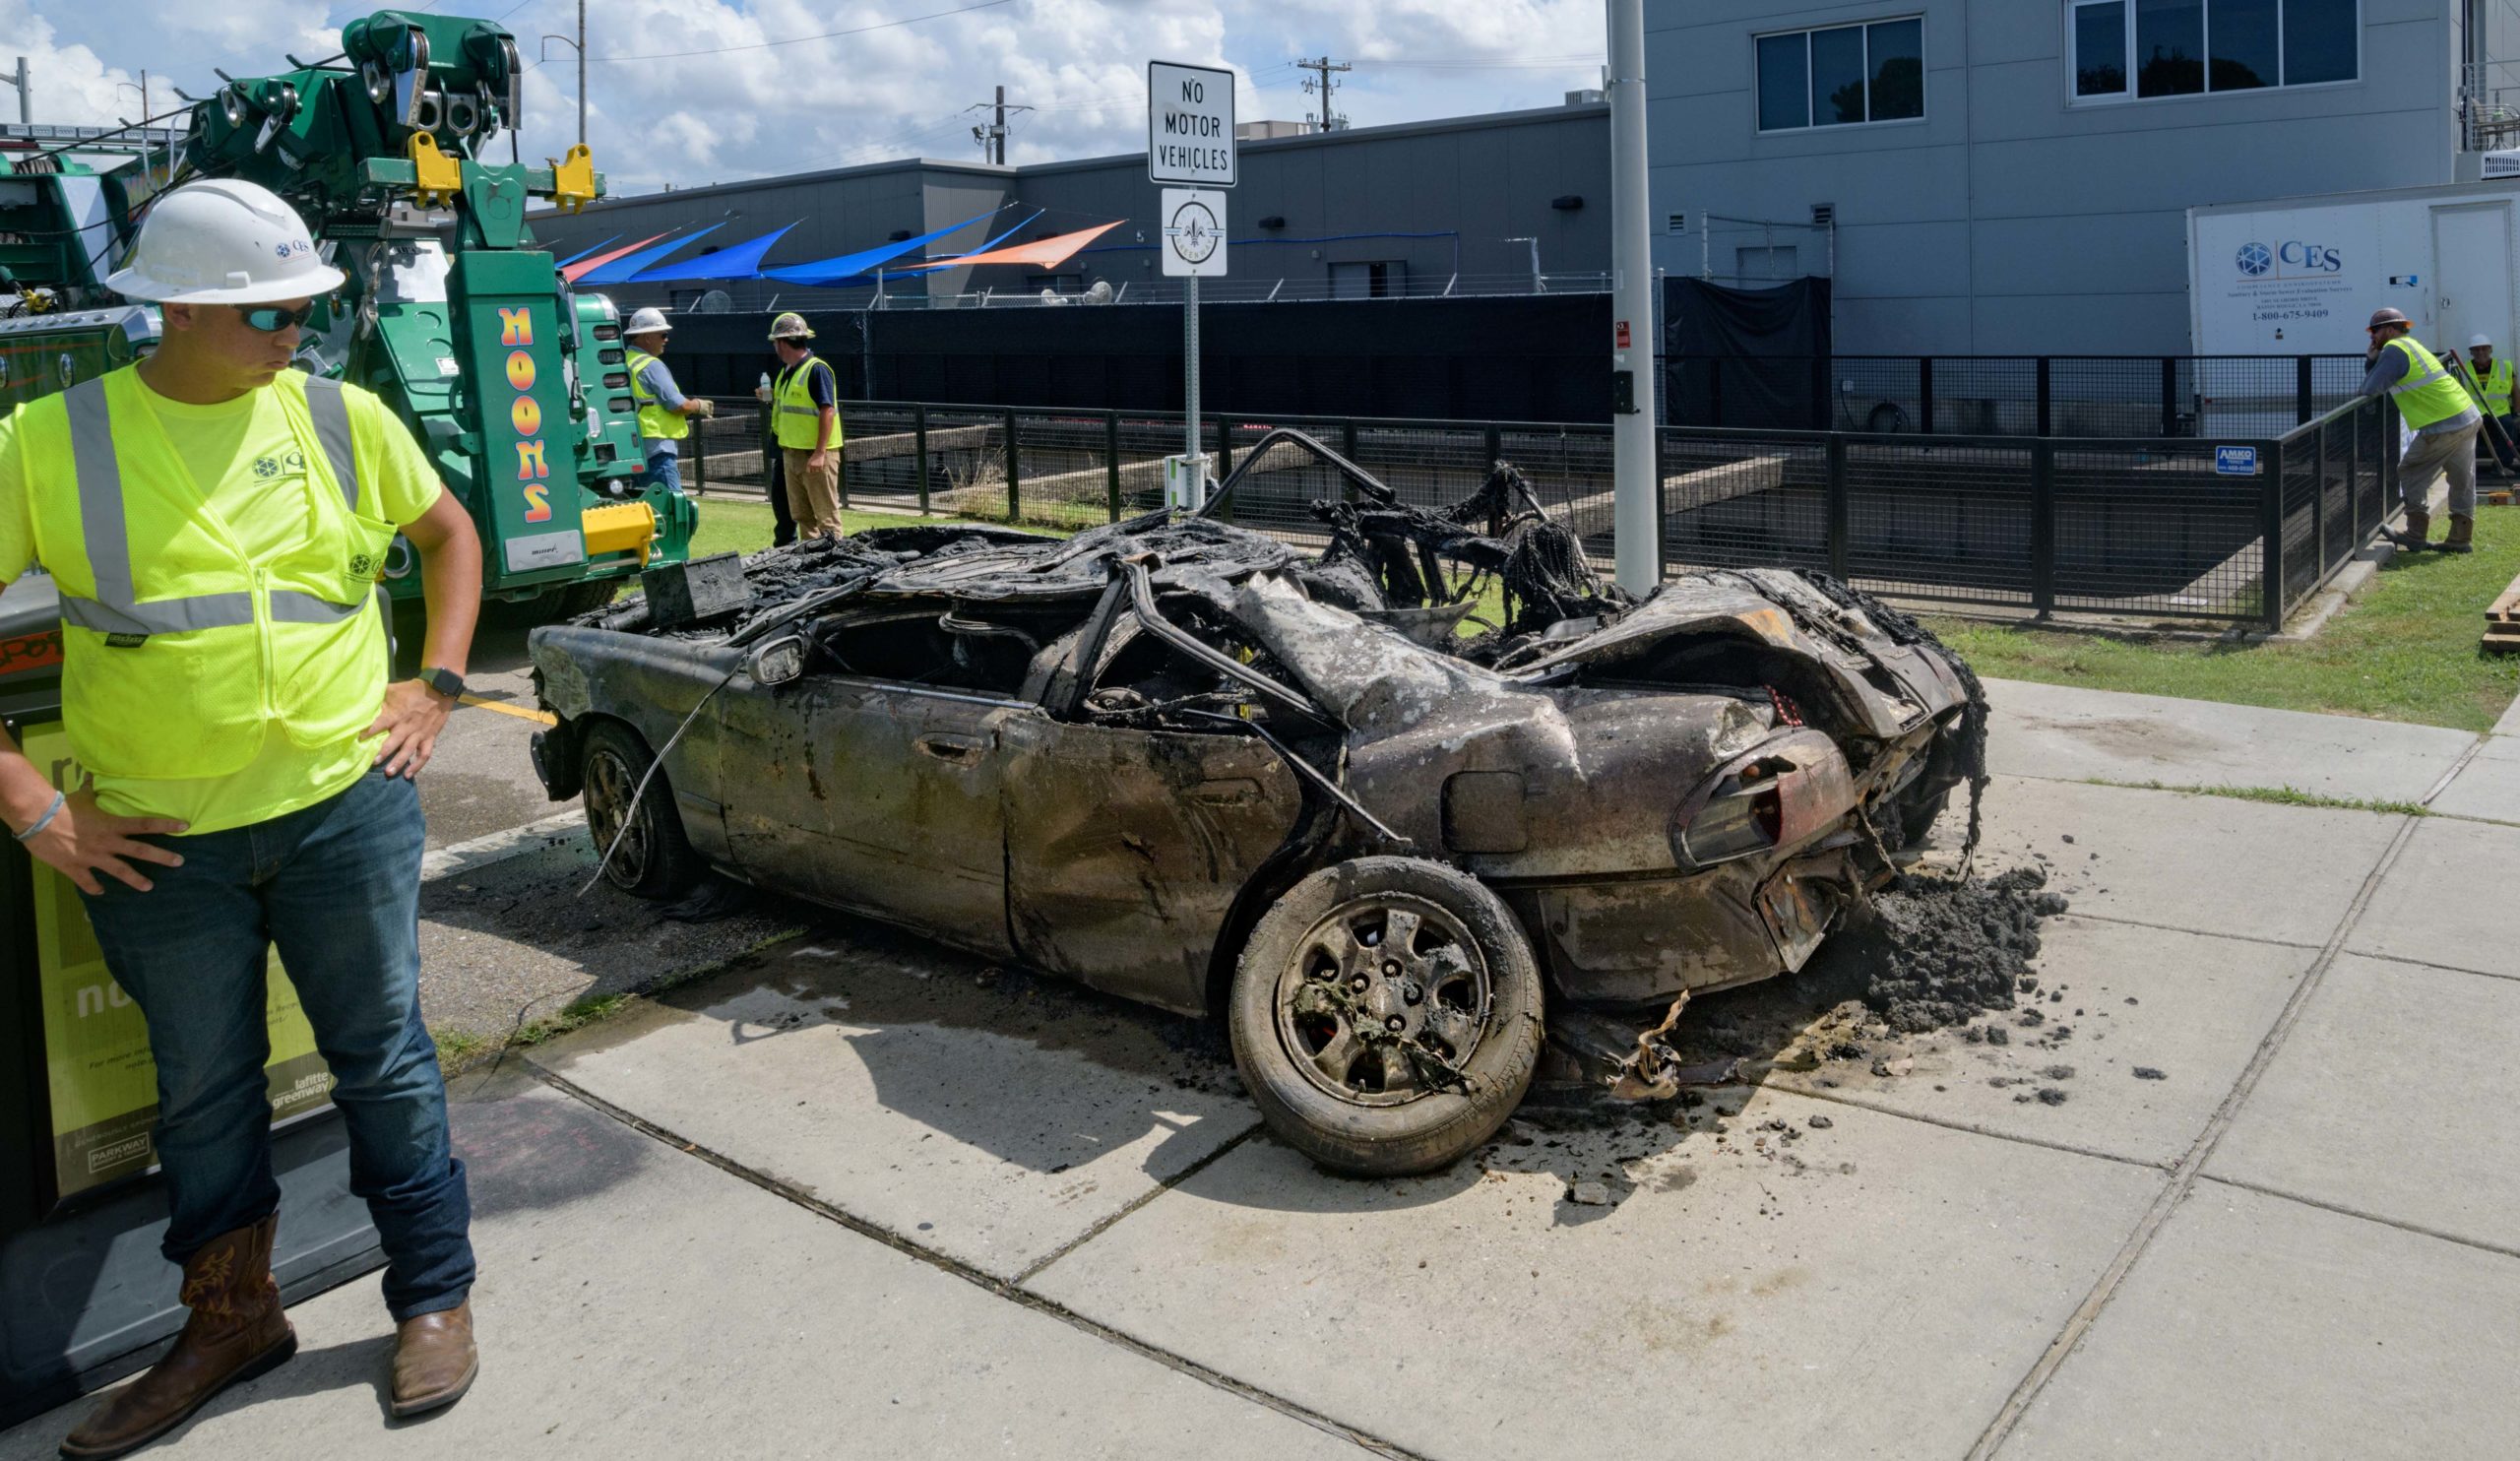 A Mazada 626 car with a 2007 Louisiana brake tag and Mardi Gras beads coming from the trunk is removed from deep inside the Lafitte Canal that drains flood and other water from Mid-City including the Lafitte Greenway in New Orleans, La. Thursday, Aug. 22, 2019. It is among the largest pieces to pulled from a New Orleans drainage canal by the Sewerage and Water Board. The city has suffered a few 100-year flooding events which have been exacerbated by poor drainage in the canals, pumping problems, and clogged catch basins.  Photo by Matthew Hinton